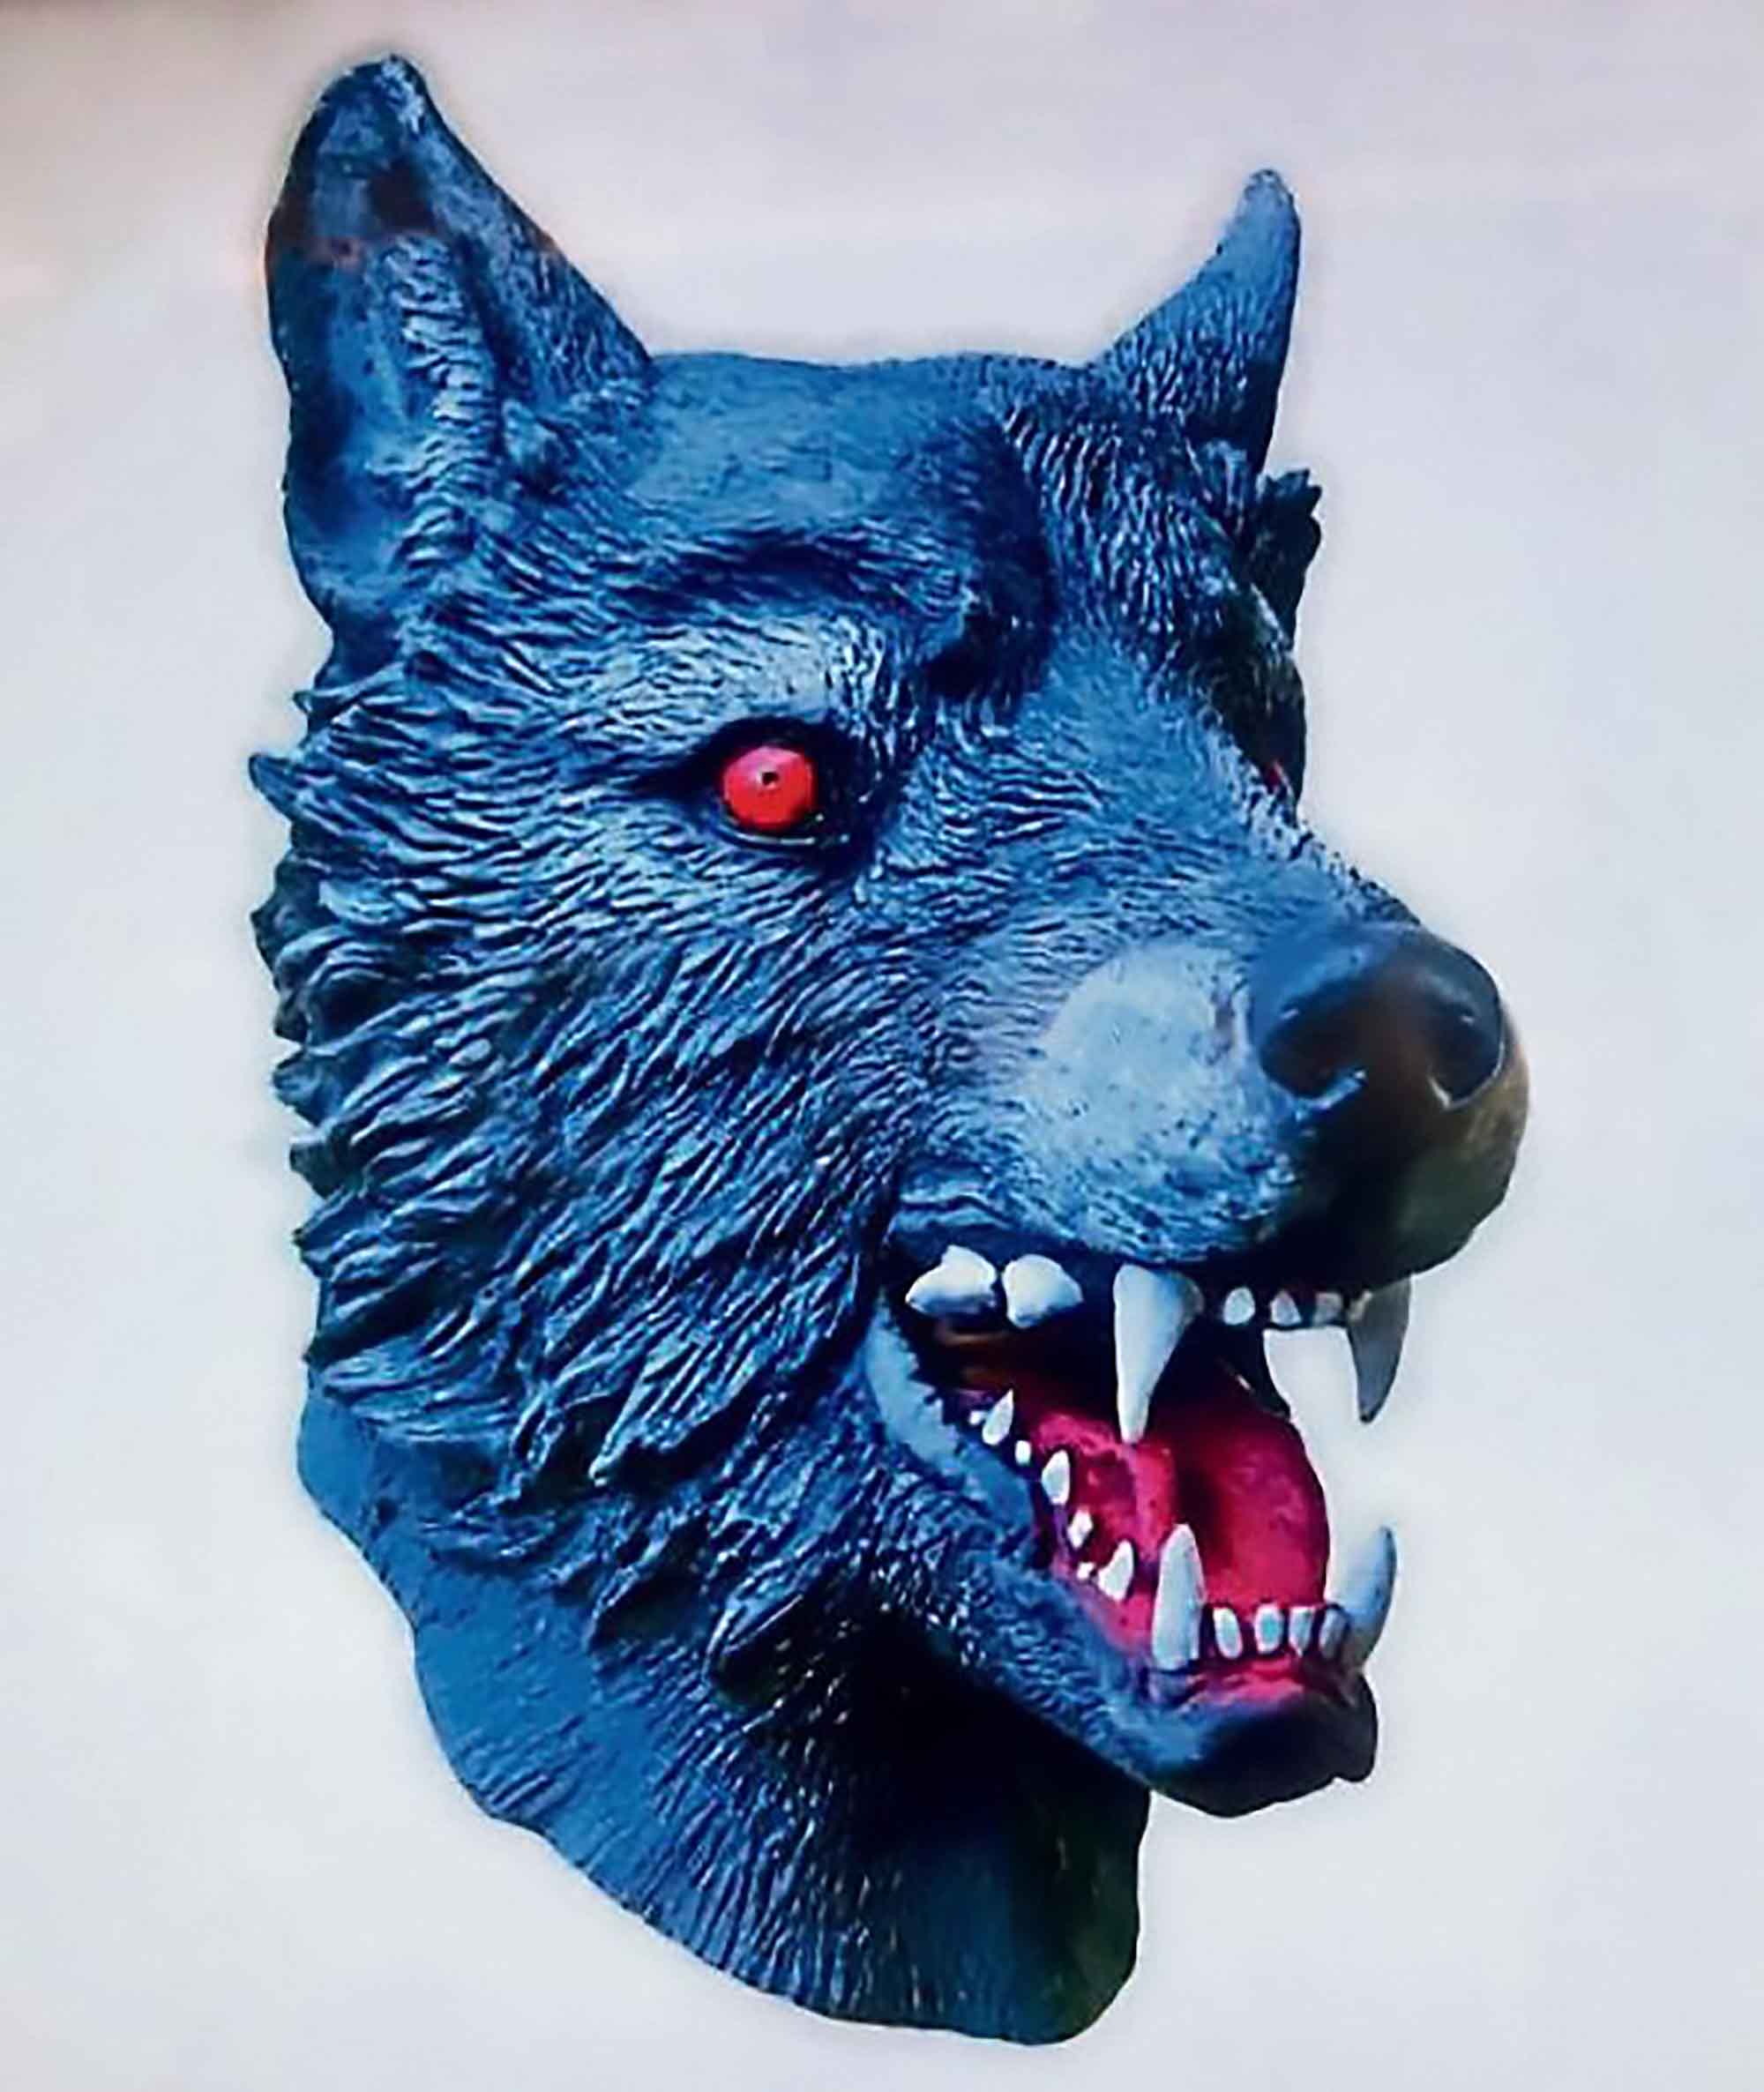 Read more about the article Freed Wolf-Mask Rapist Of 11yo Girl Not Deemed Dangerous